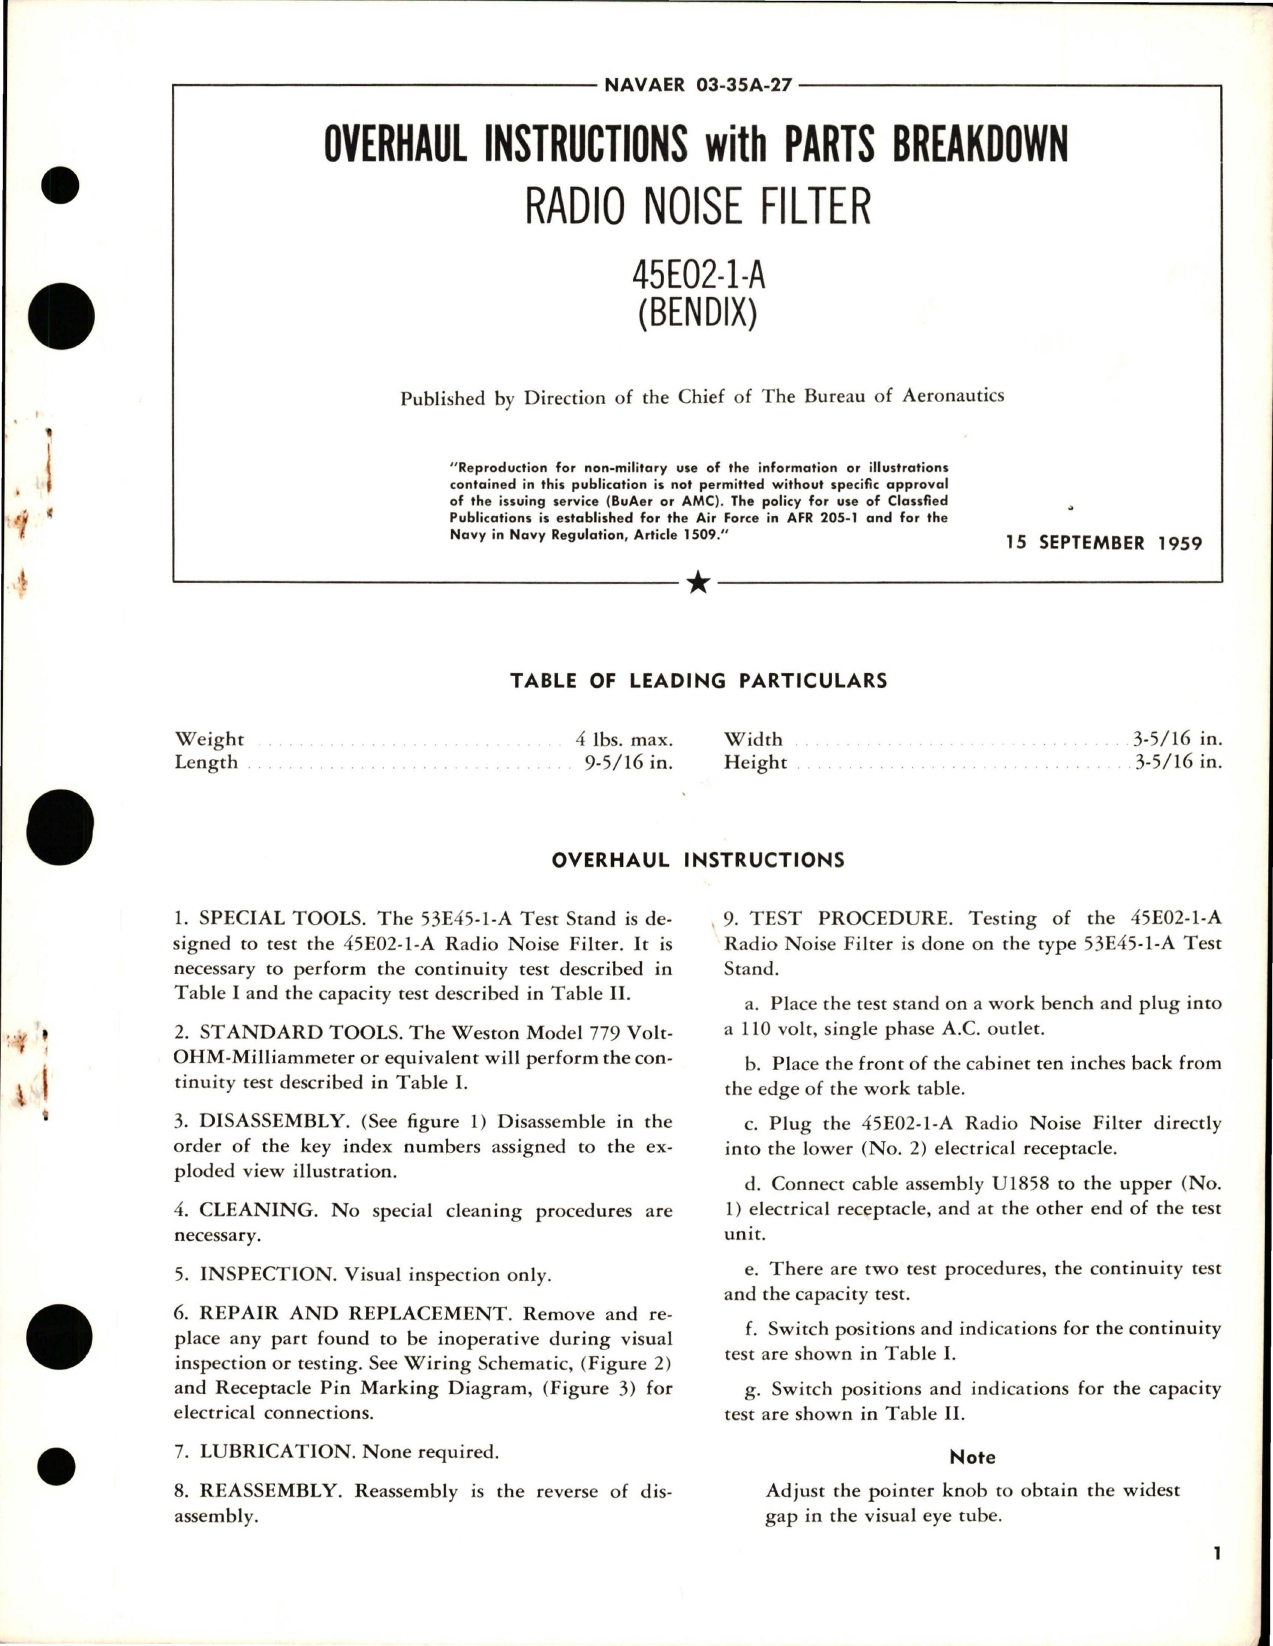 Sample page 1 from AirCorps Library document: Overhaul Instructions with Parts Breakdown for Radio Noise Filter - 45E02-1-A